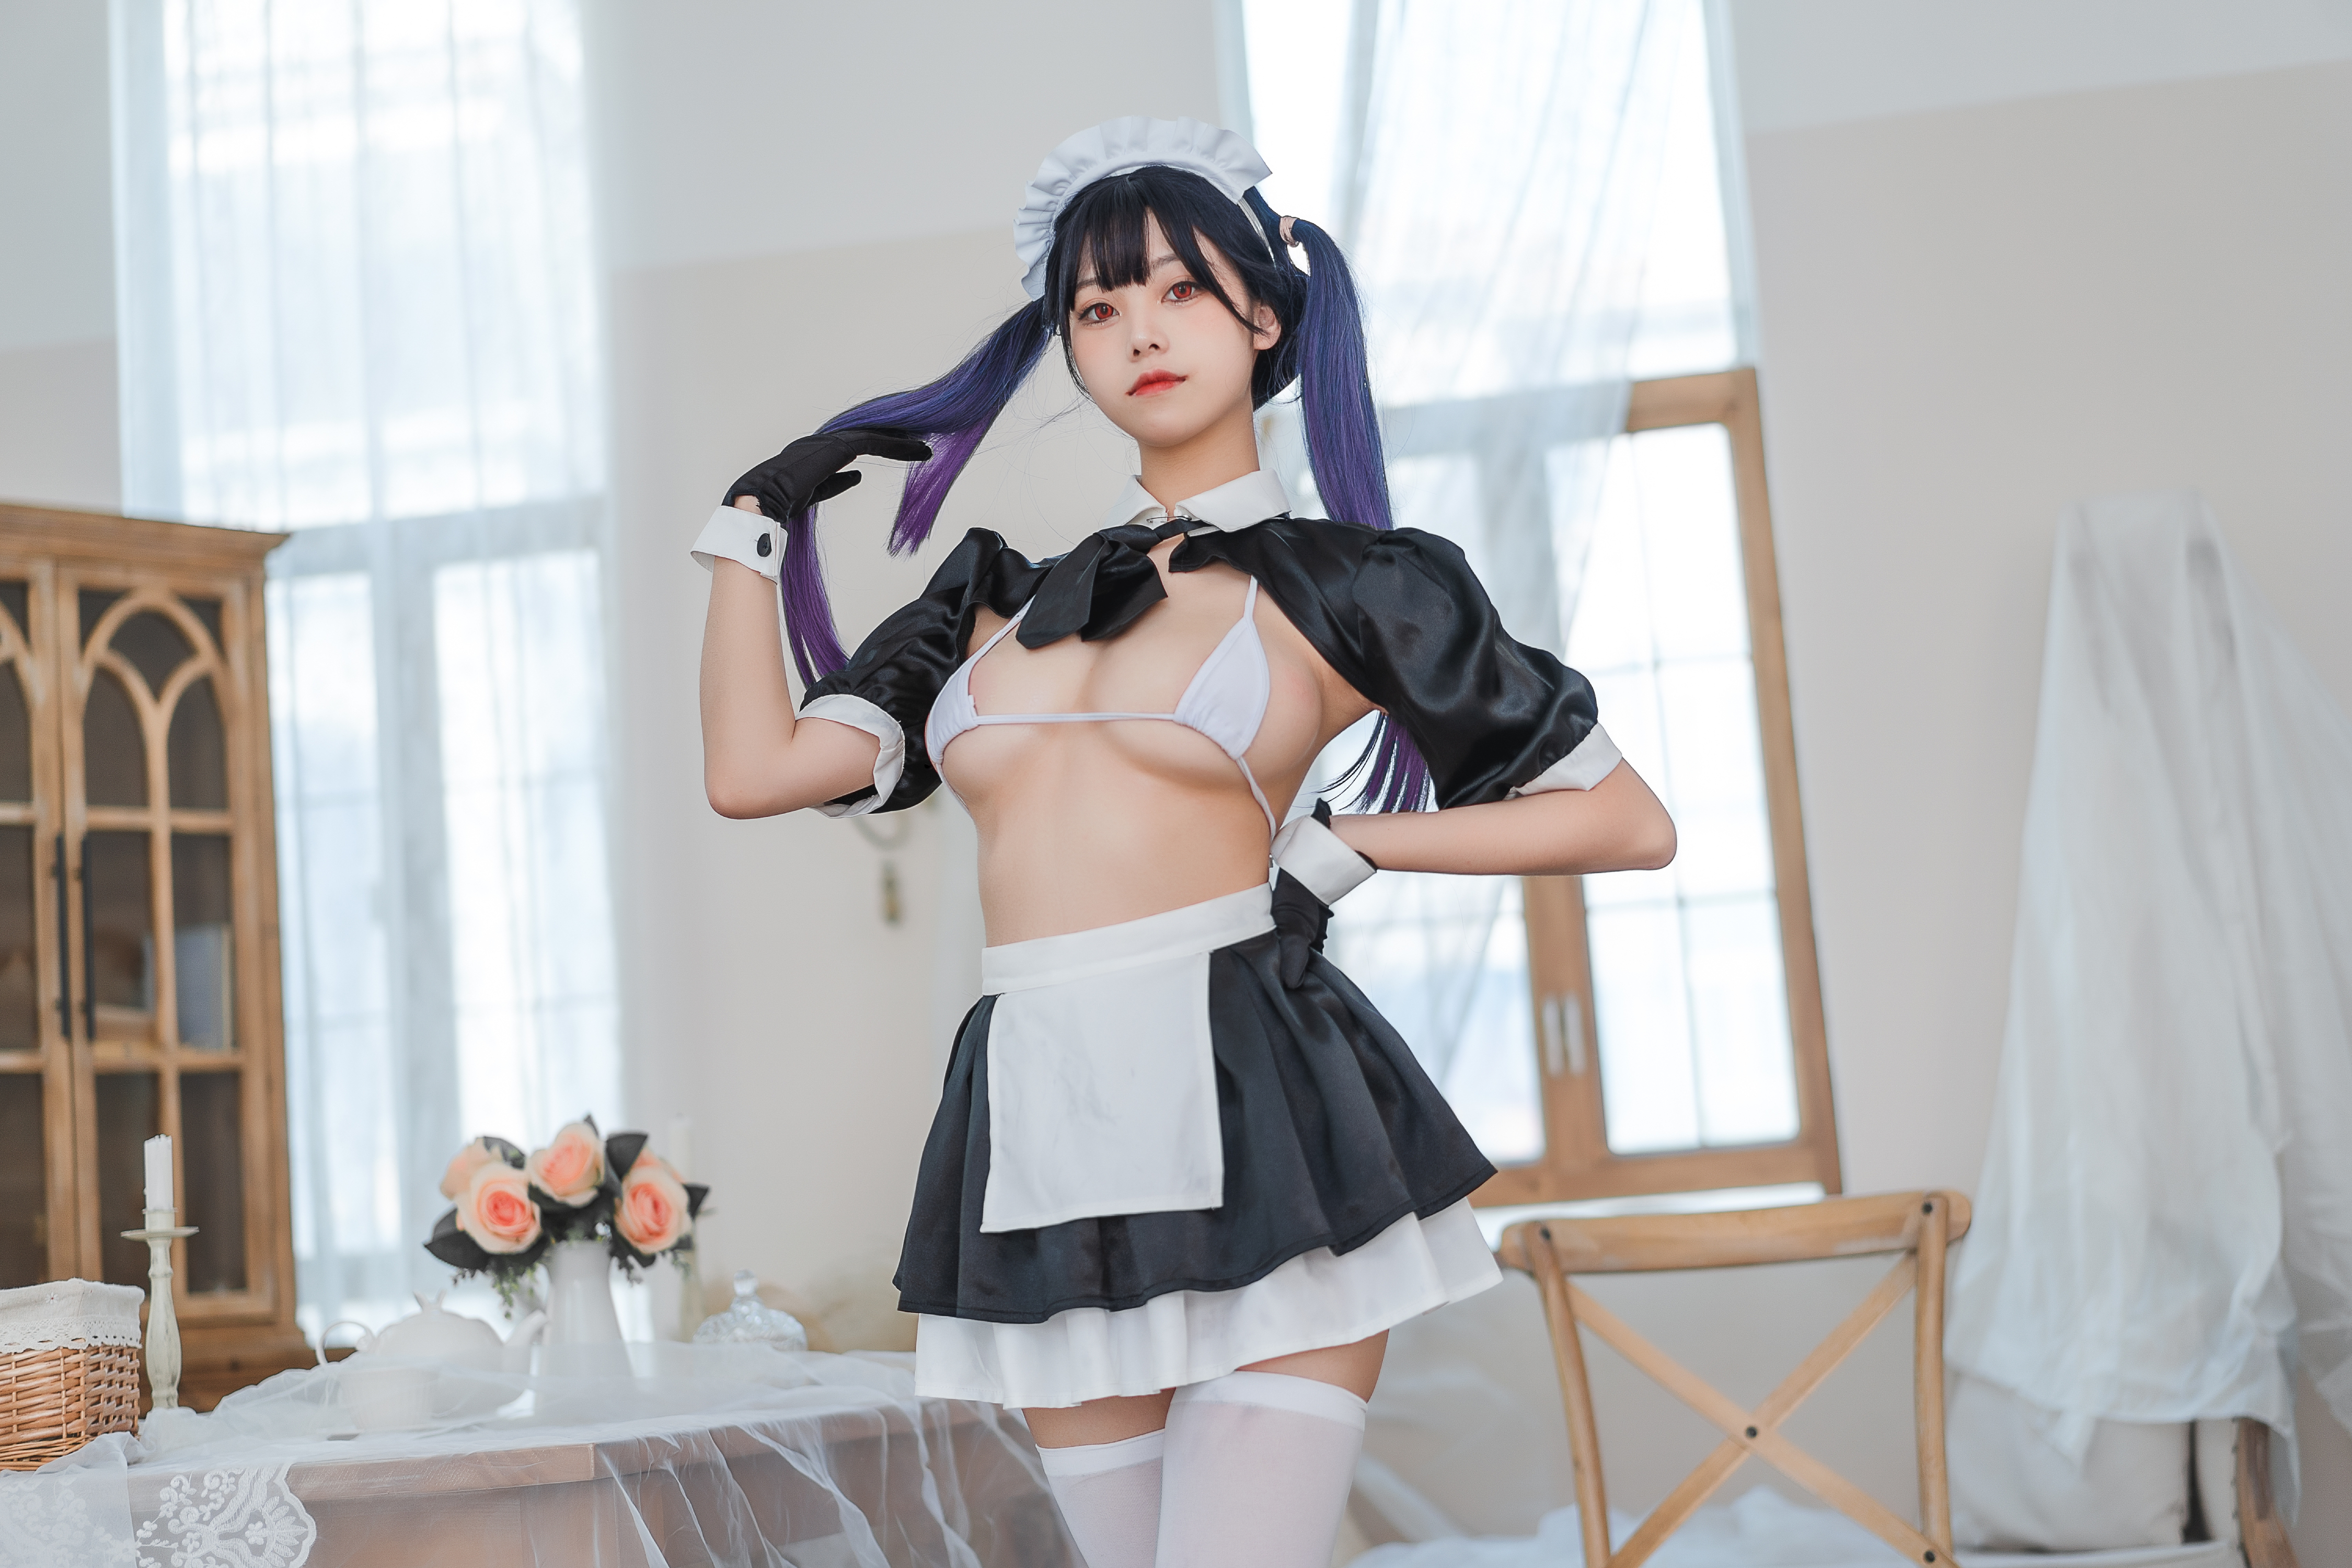 People 4500x3000 Mizhimaoqiu women model Asian cosplay maid maid outfit twintails underwear bra stockings white stockings indoors women indoors pale